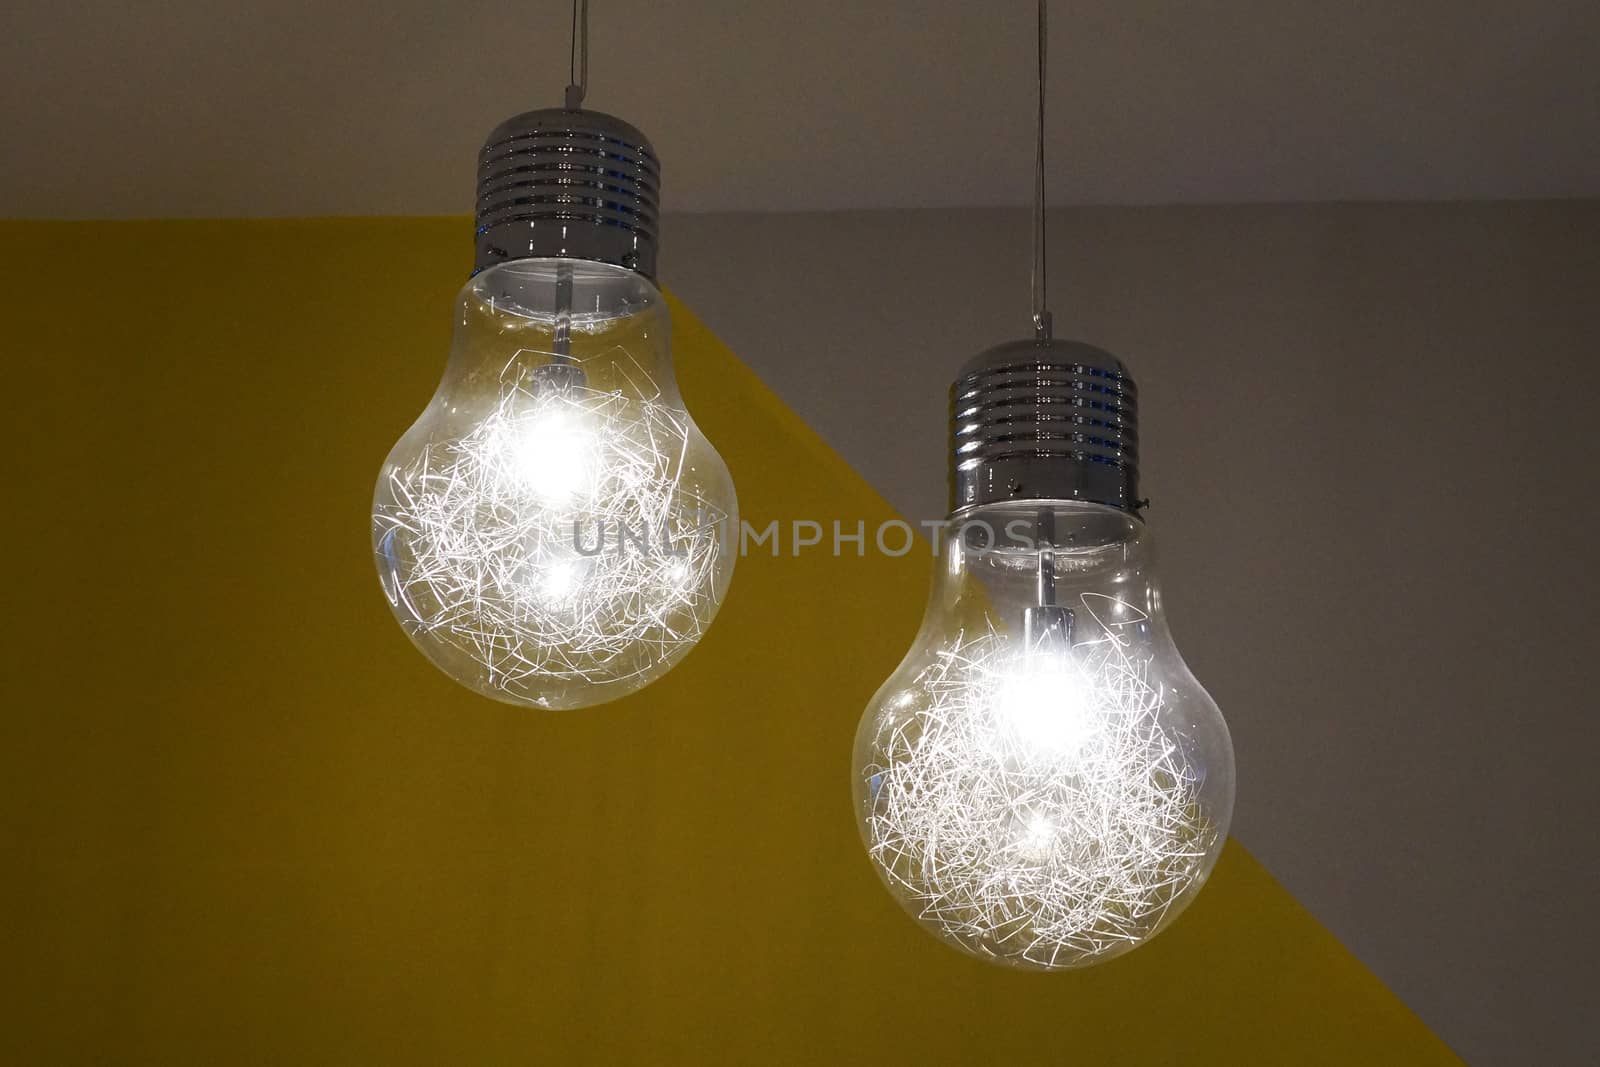 two burning chandeliers in the form of ordinary bulbs on the ceiling